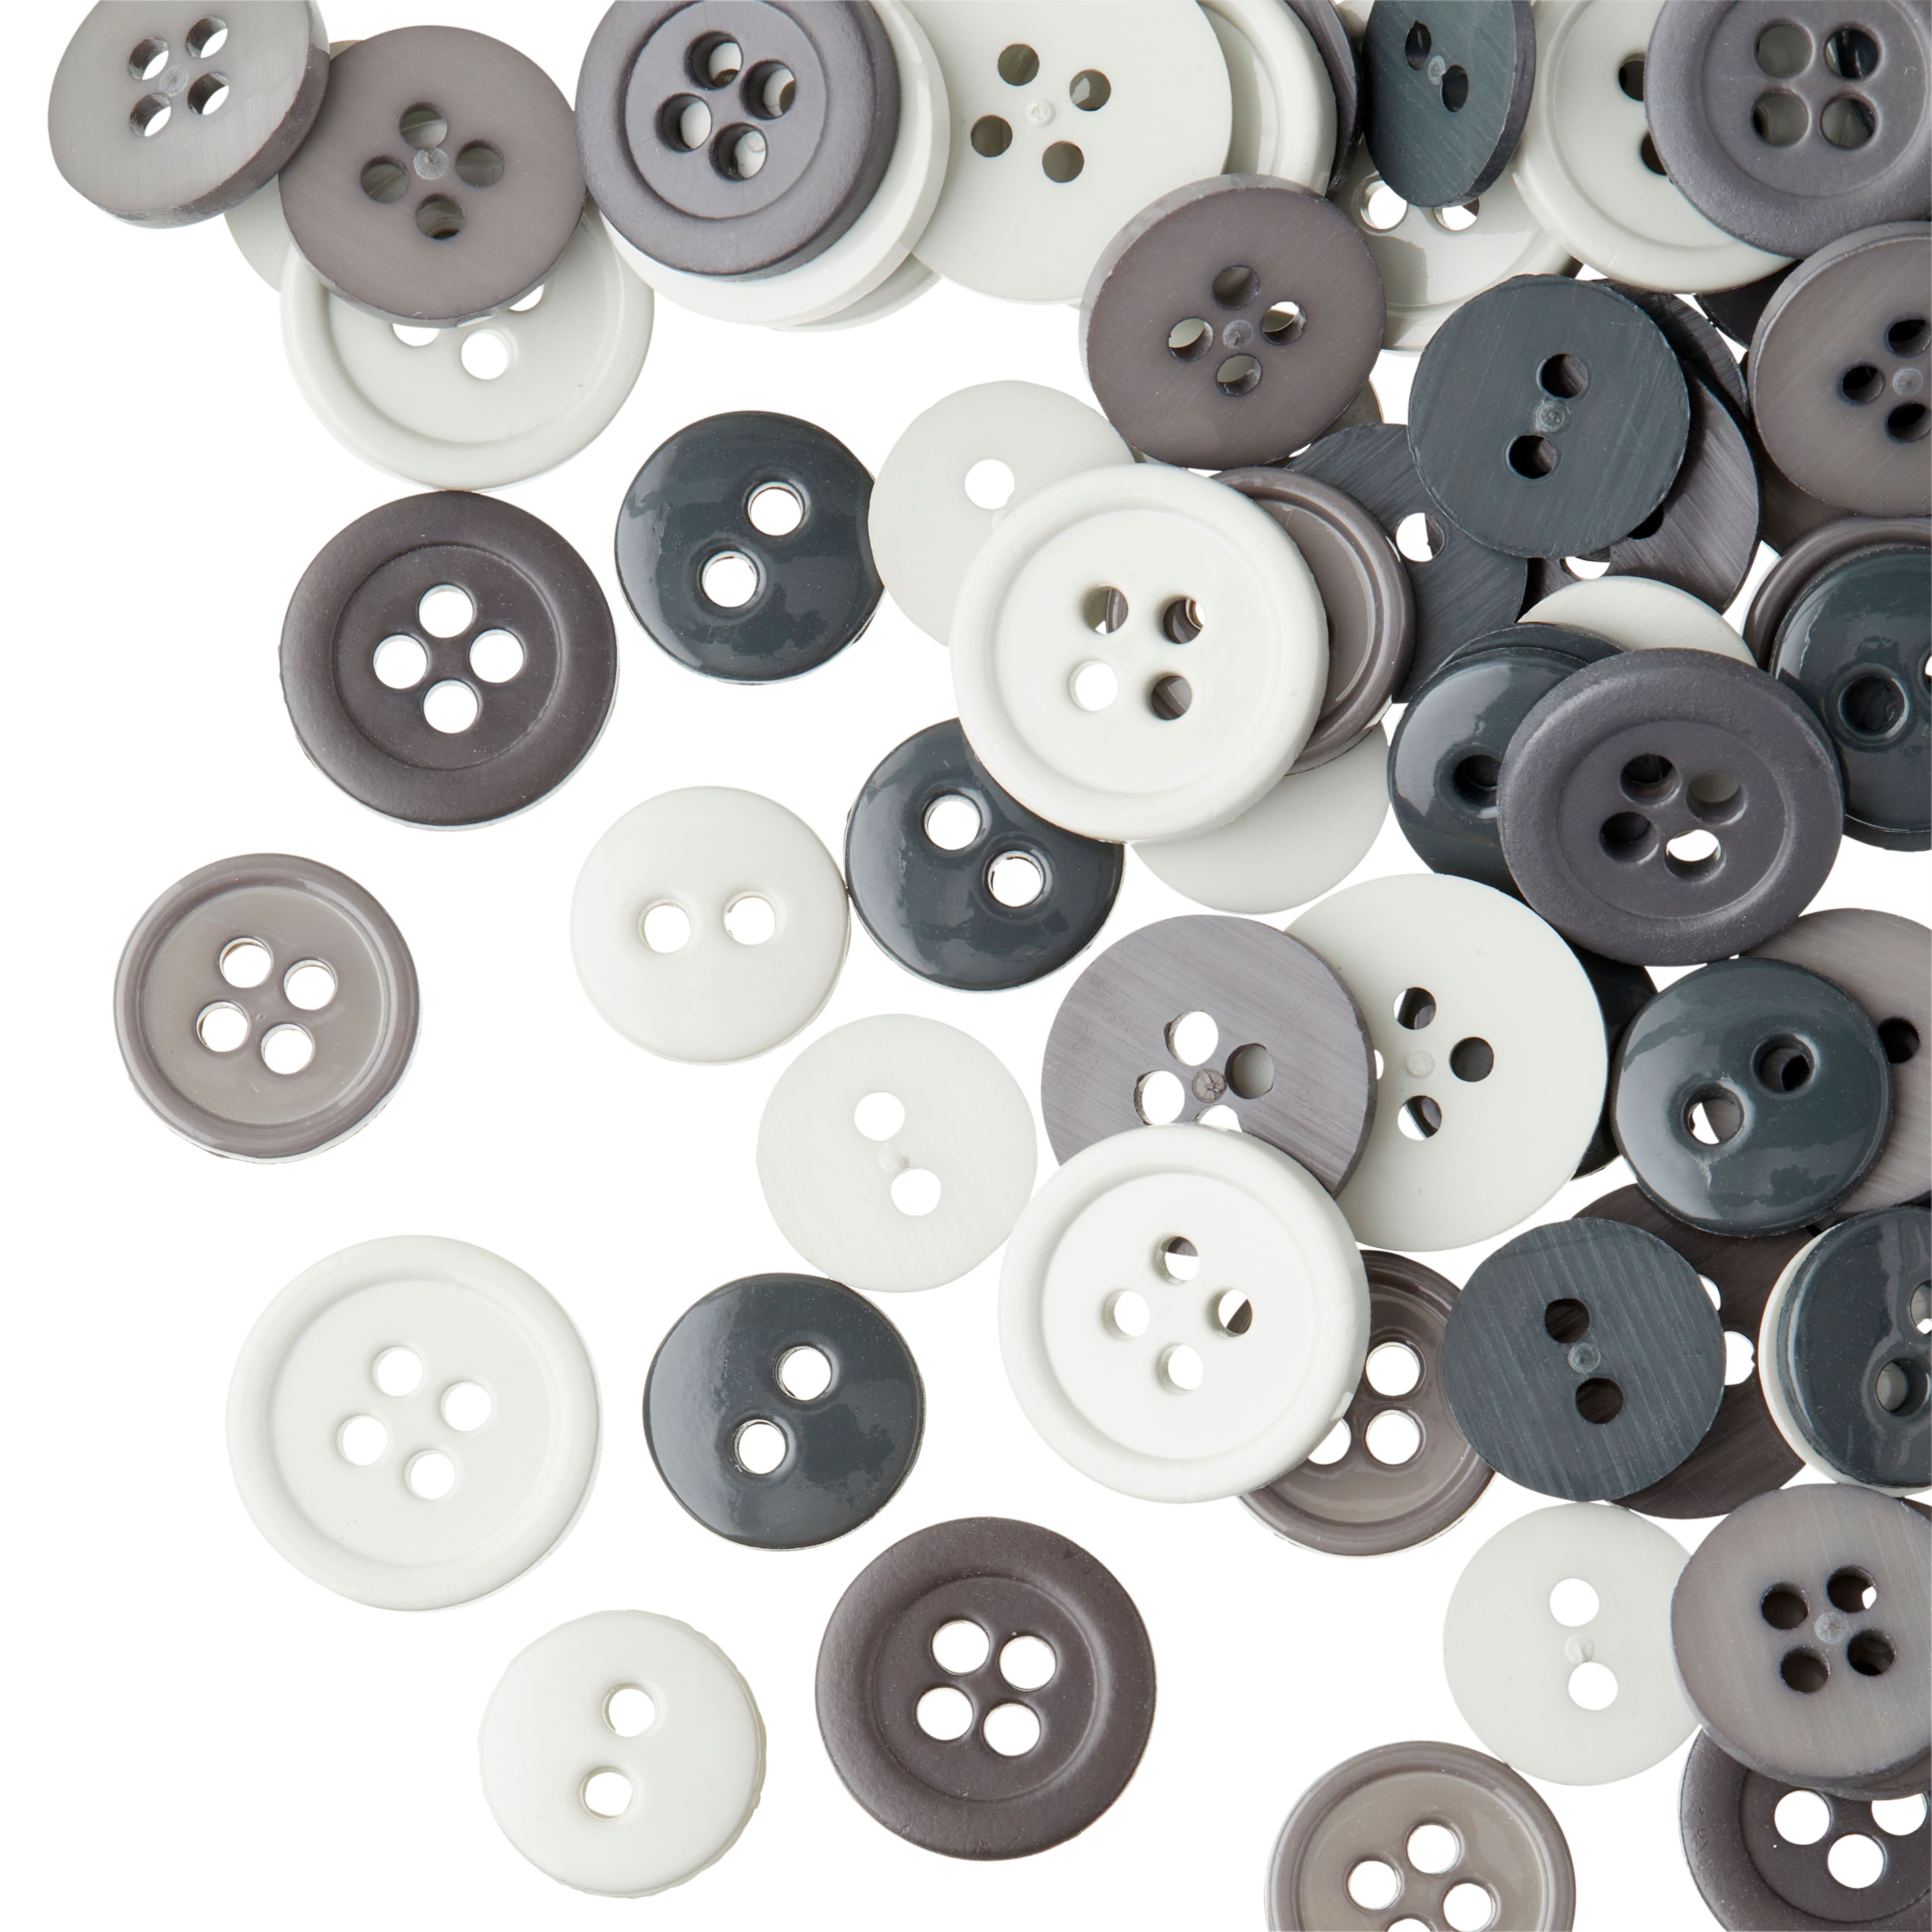 Silver Filigree Jean Buttons by Loops & Threads | Michaels